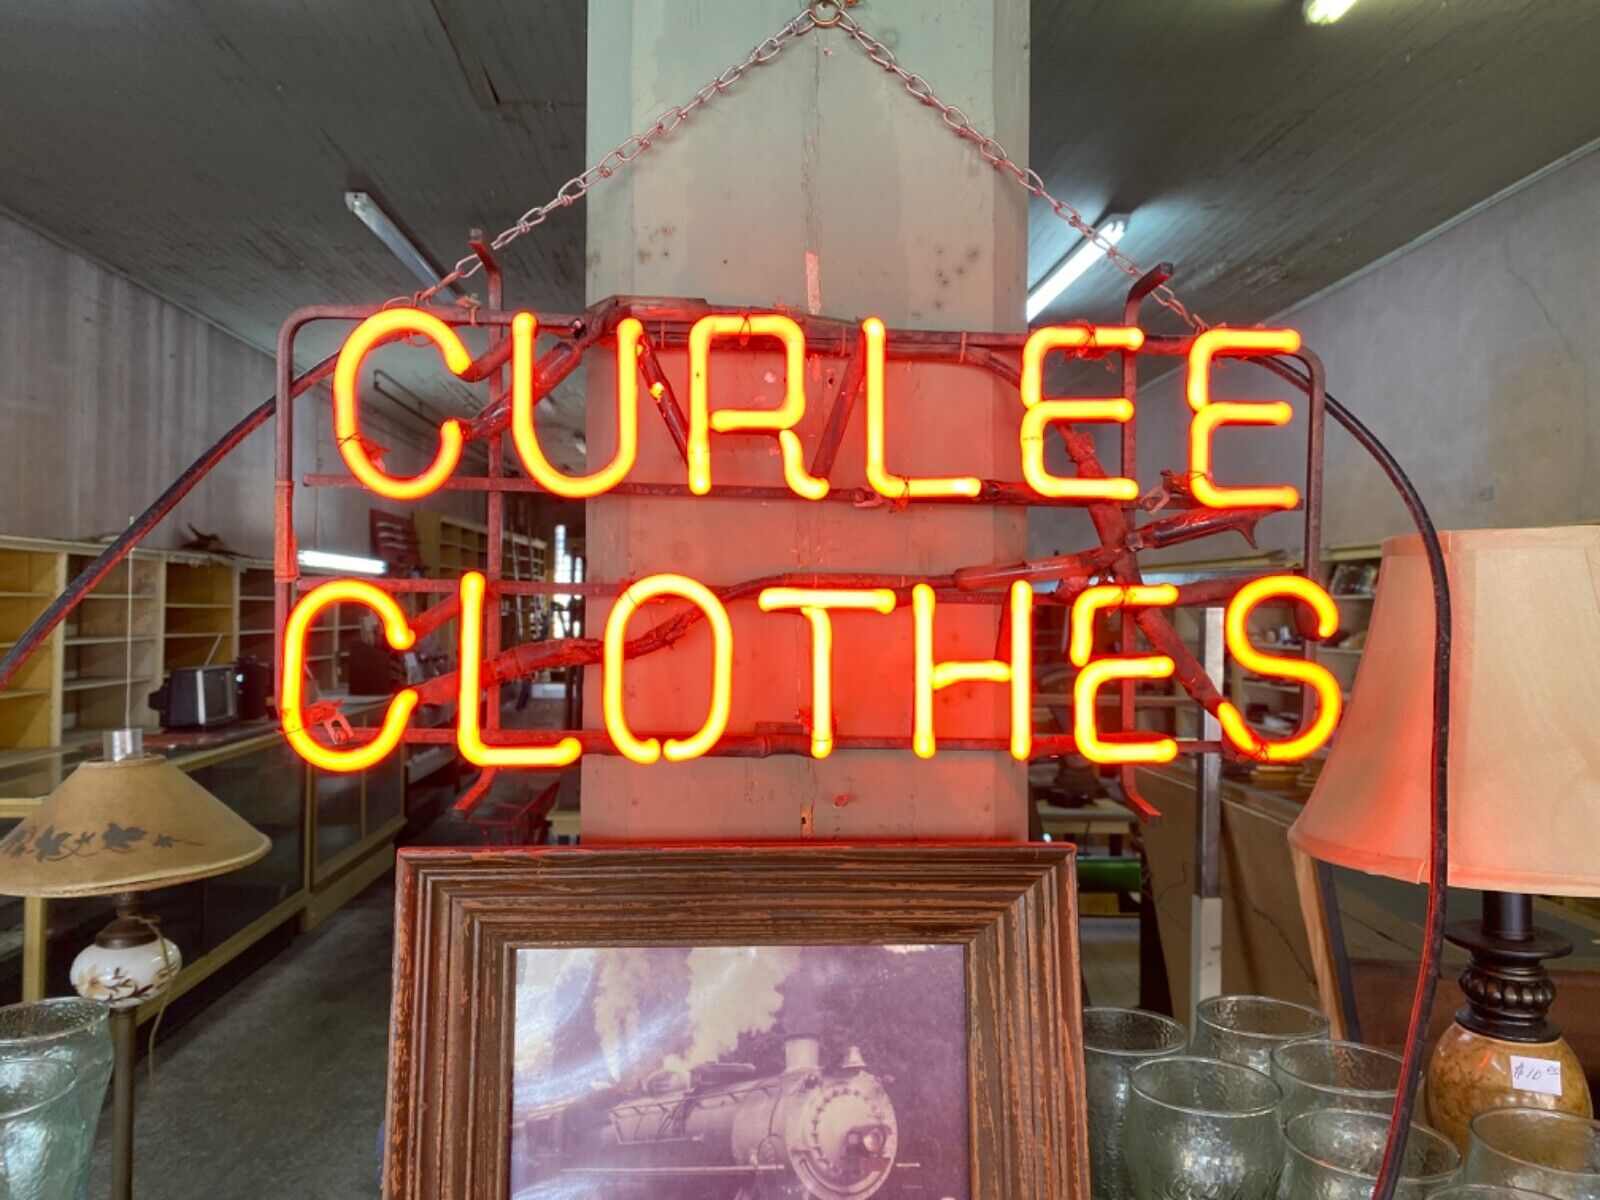 Vintage Neon Curlee Clothes Advertising Sign